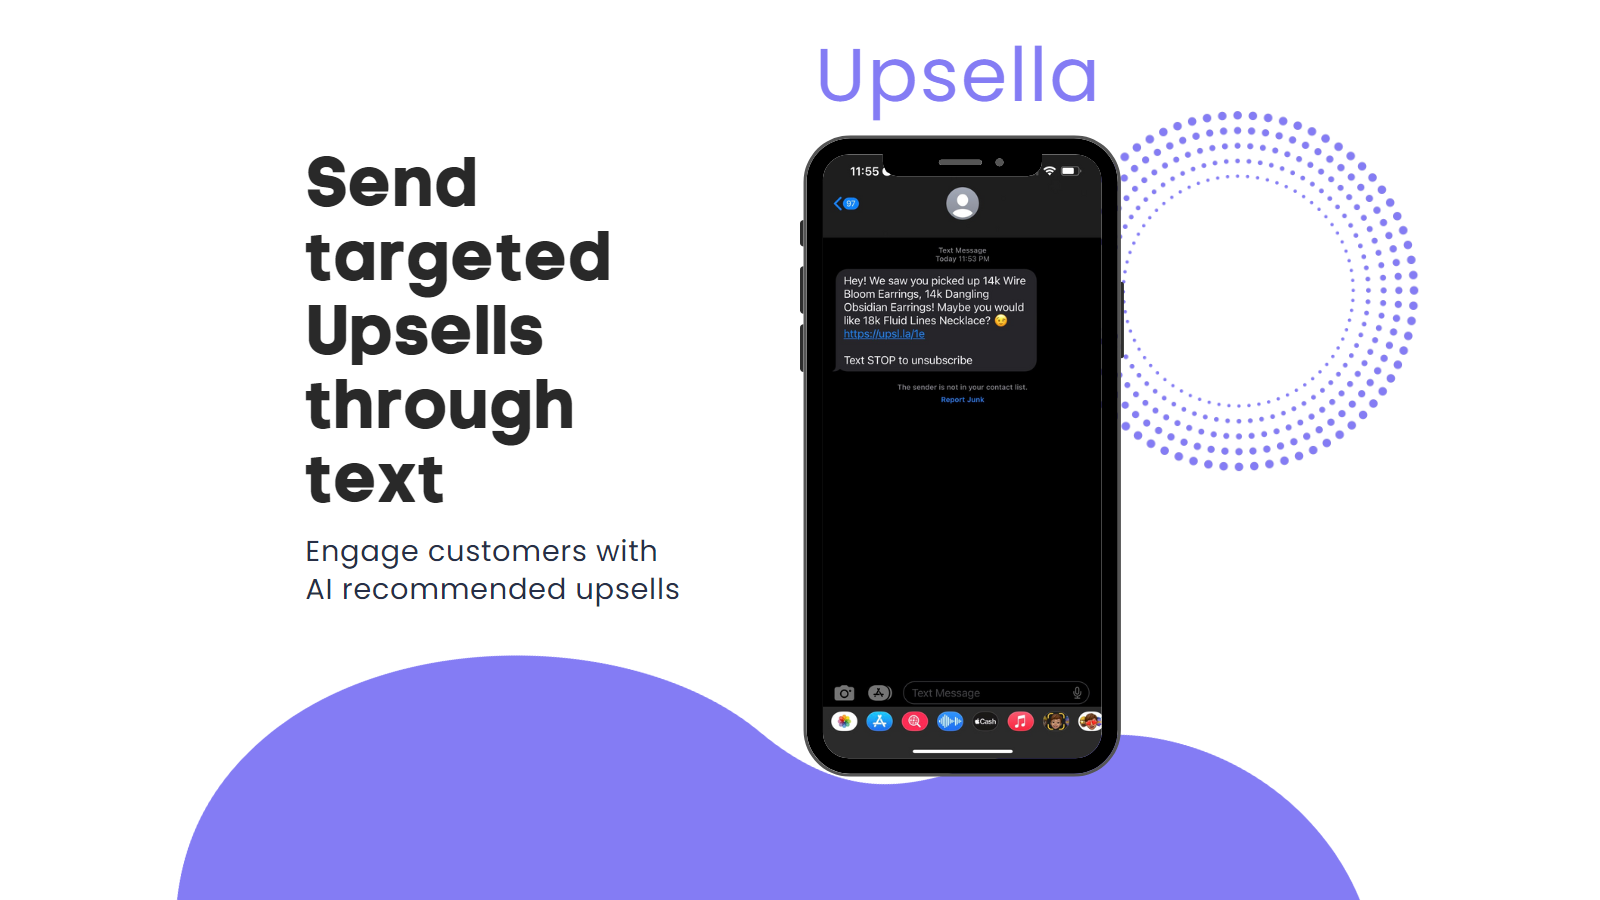 Send targeted Upsells through text Engage customers with upsells